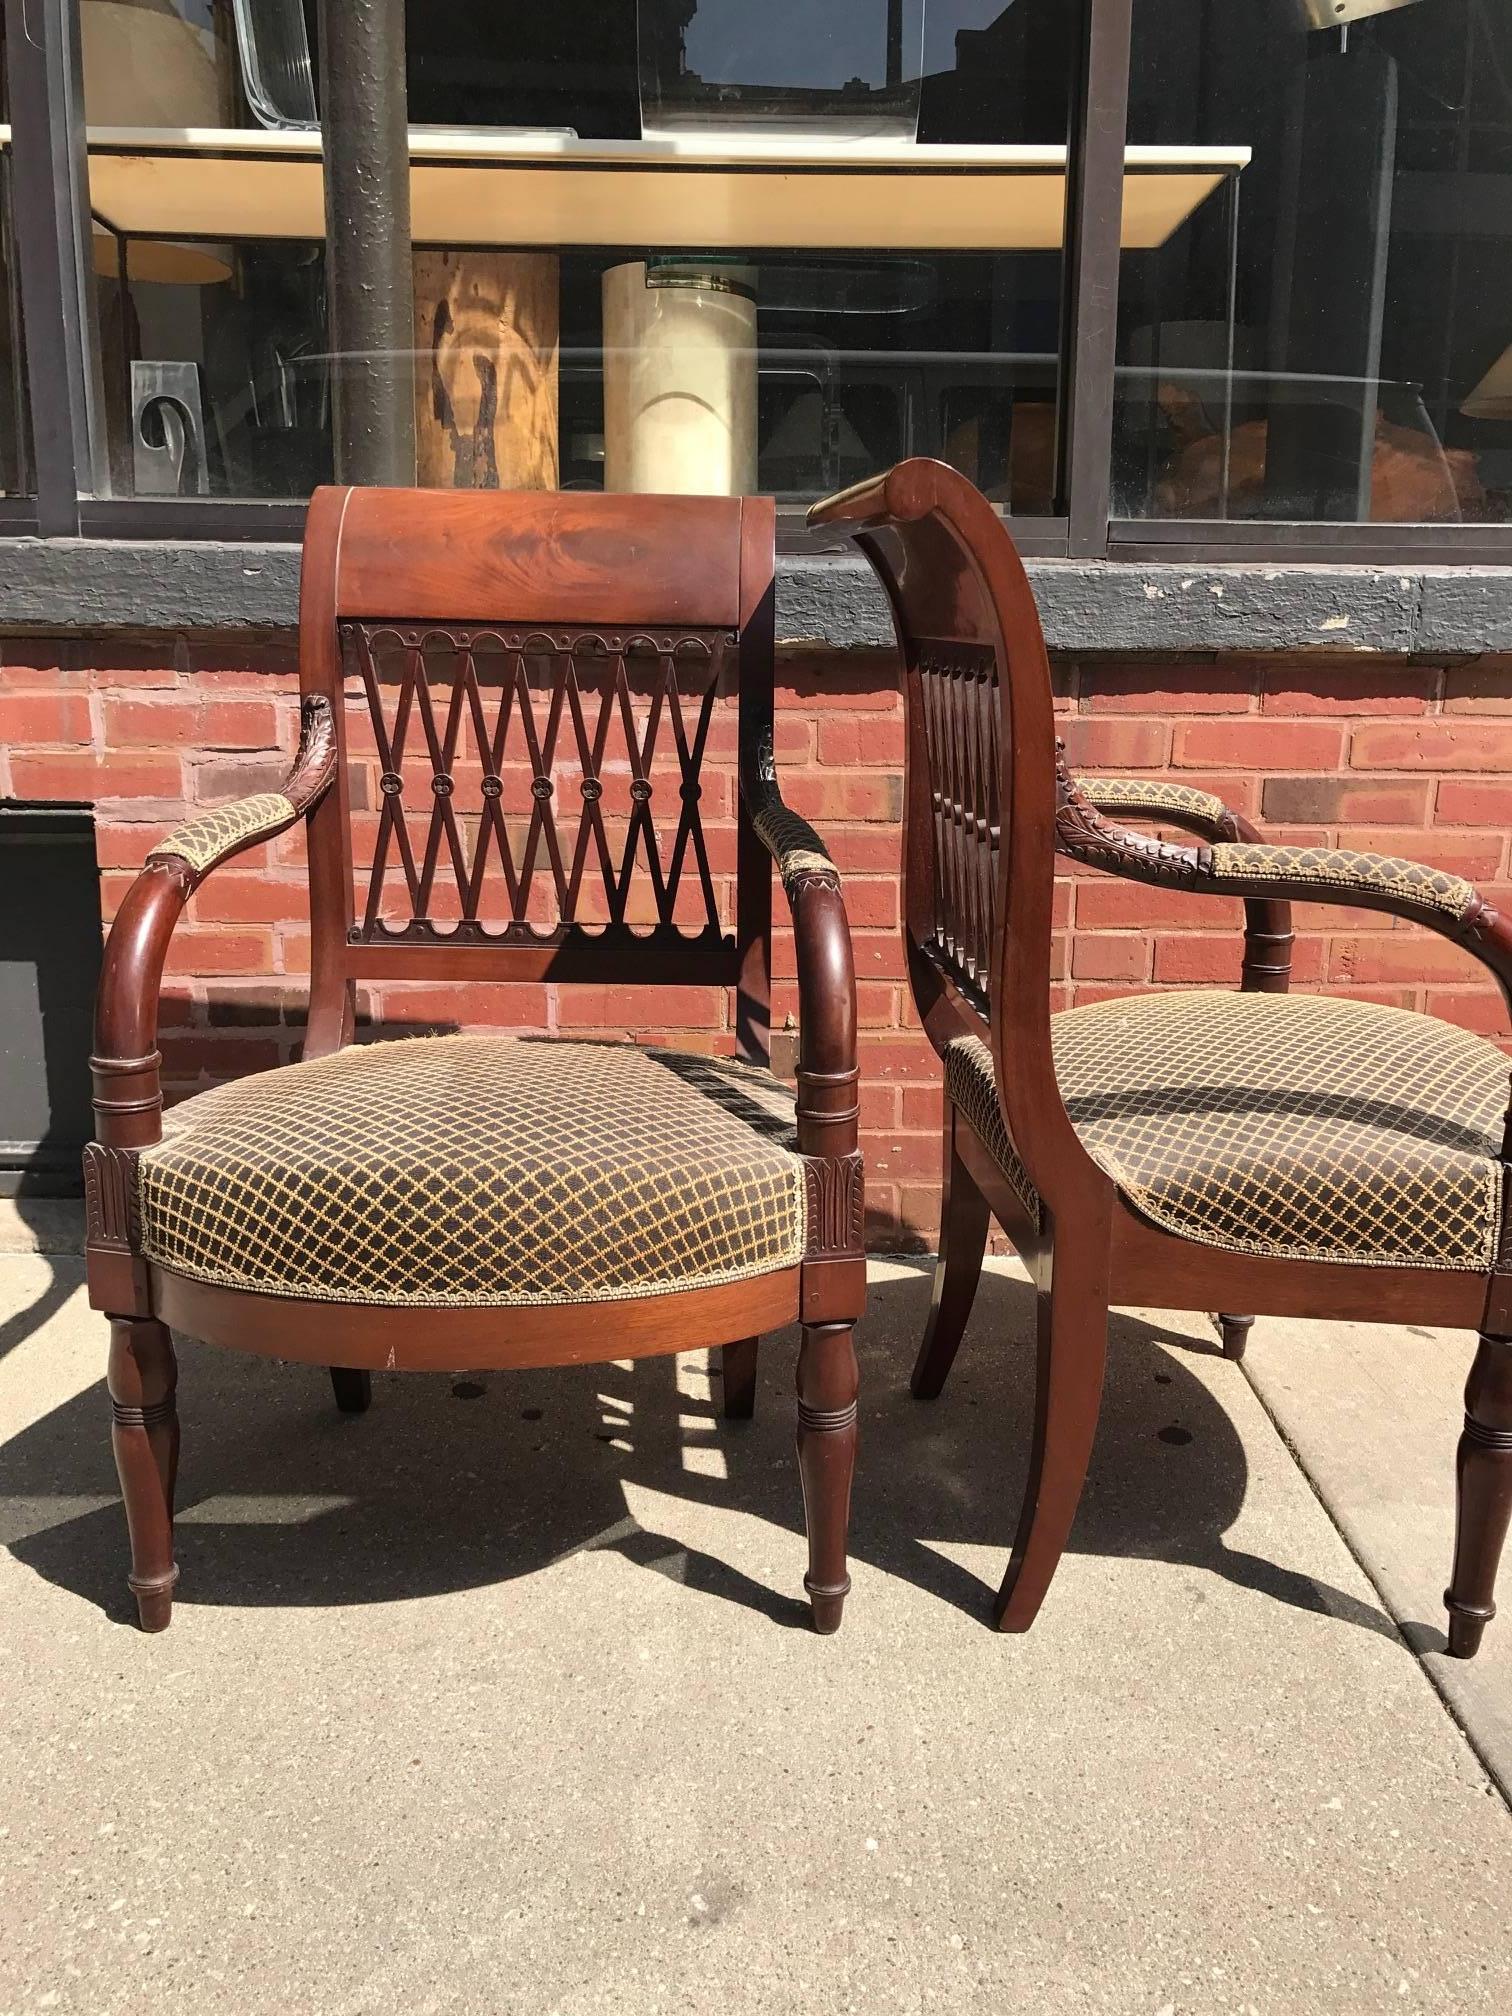 French 18th century mahogany fauteuils. The armchairs are attributed to Henri Jacob 1753-1824. The Empire chairs have a carved lattice back with a gently cured top. These chairs exhibit the finest neoclassic form of the Directroir period.

   